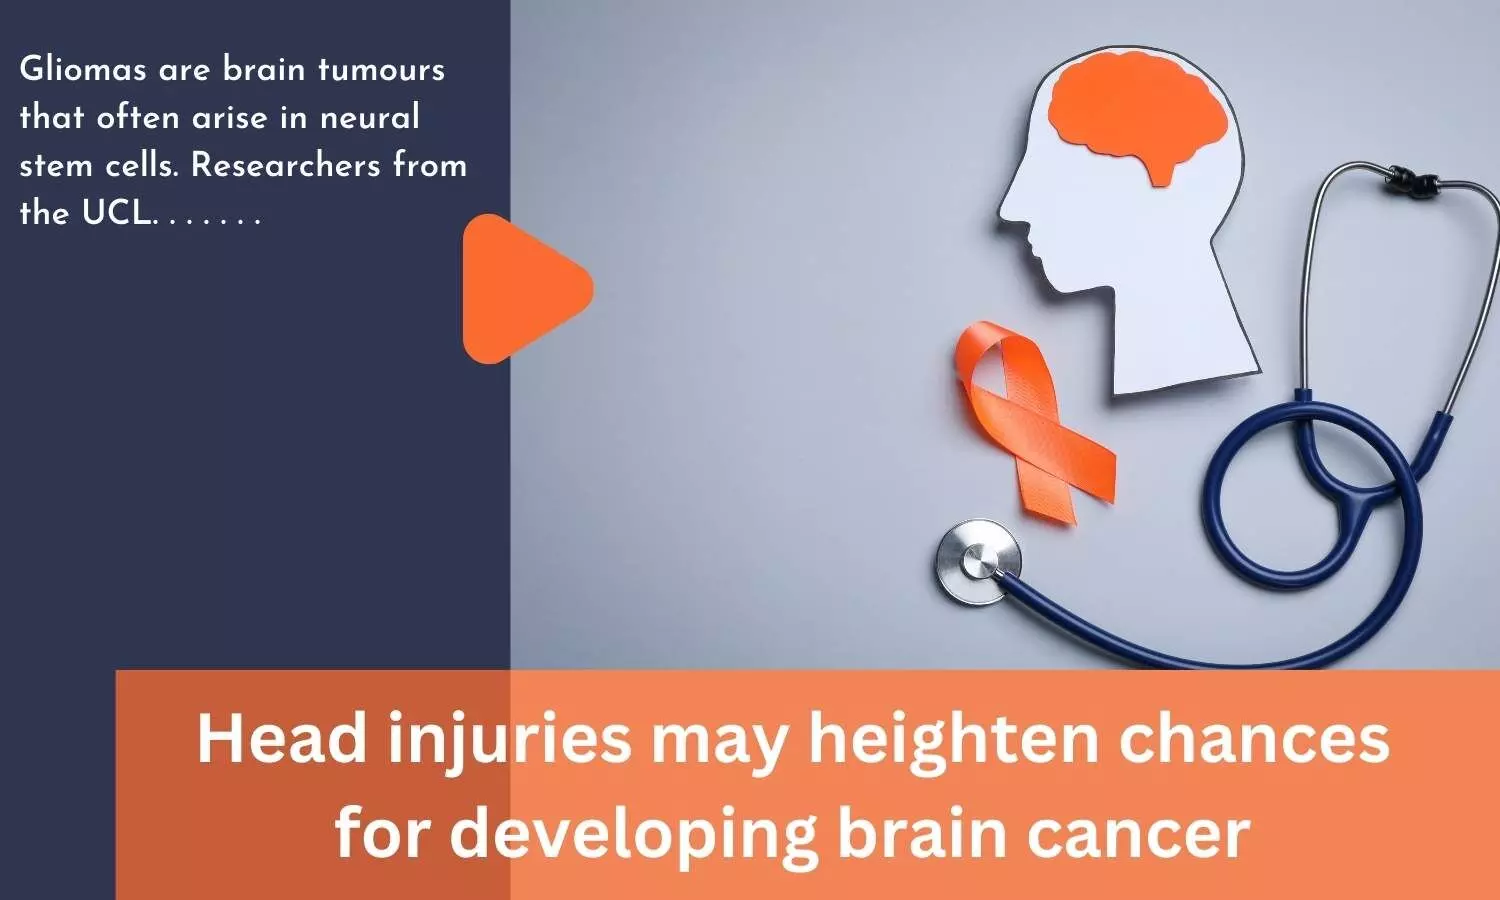 Head injuries may heighten chances for developing brain cancer